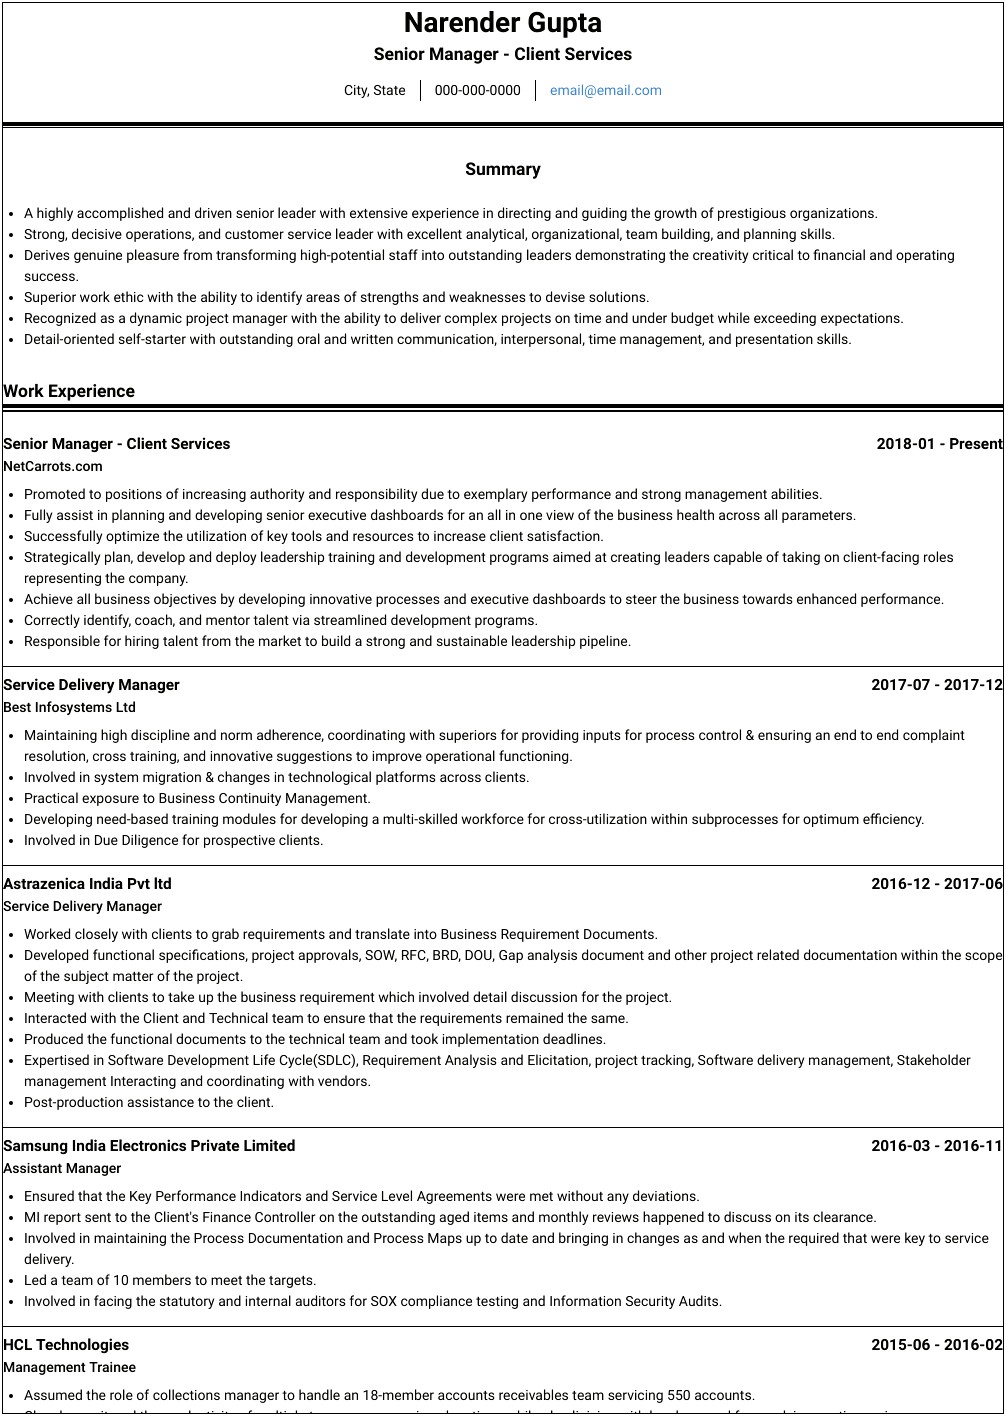 Resume Template Director Of Client Services 2019